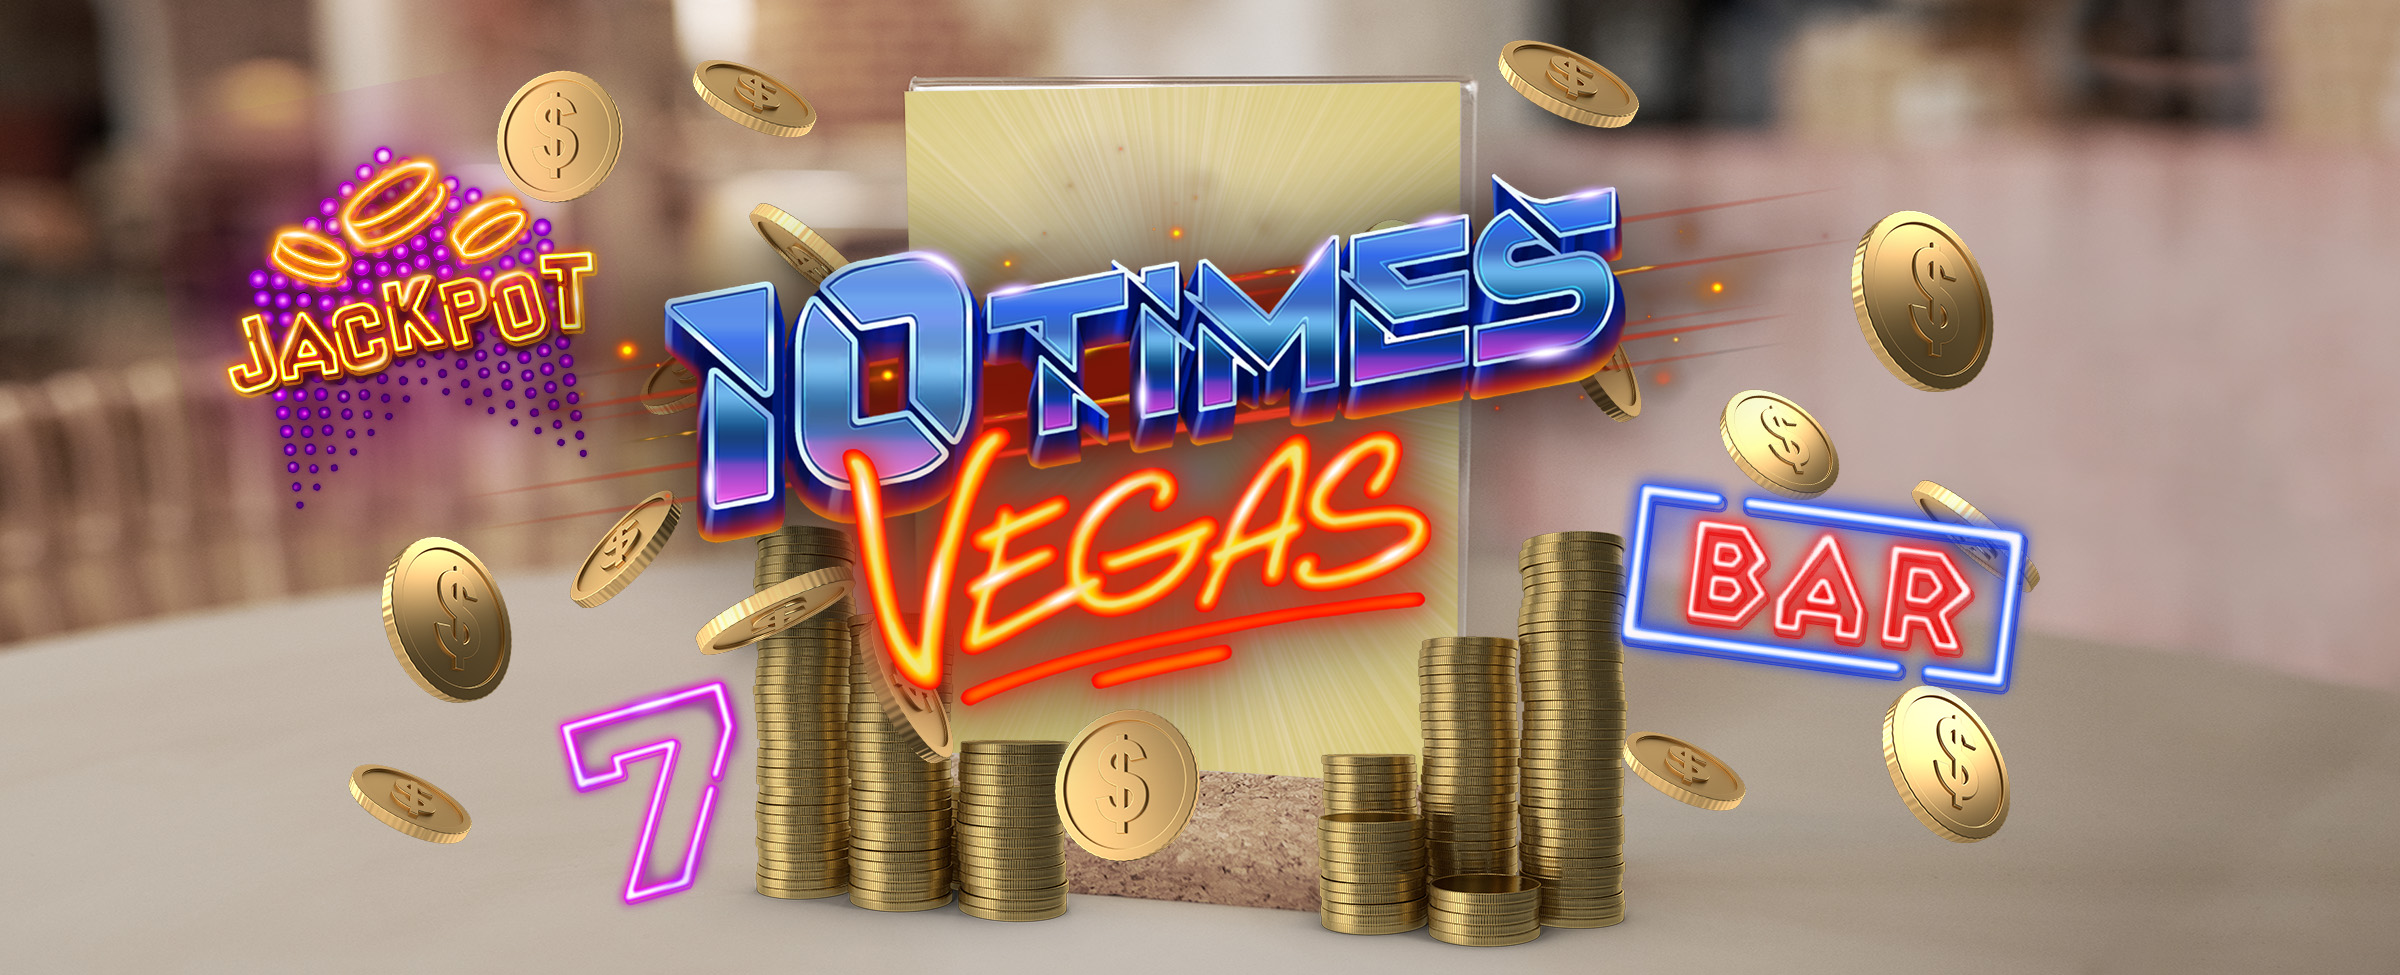 A slot game logo from Cafe Casino’s 10 Times Vegas appears in the middle of the image, with jackpot and game symbols hovering around it along with gold coins, with stacks of gold coins on a table in a diner.